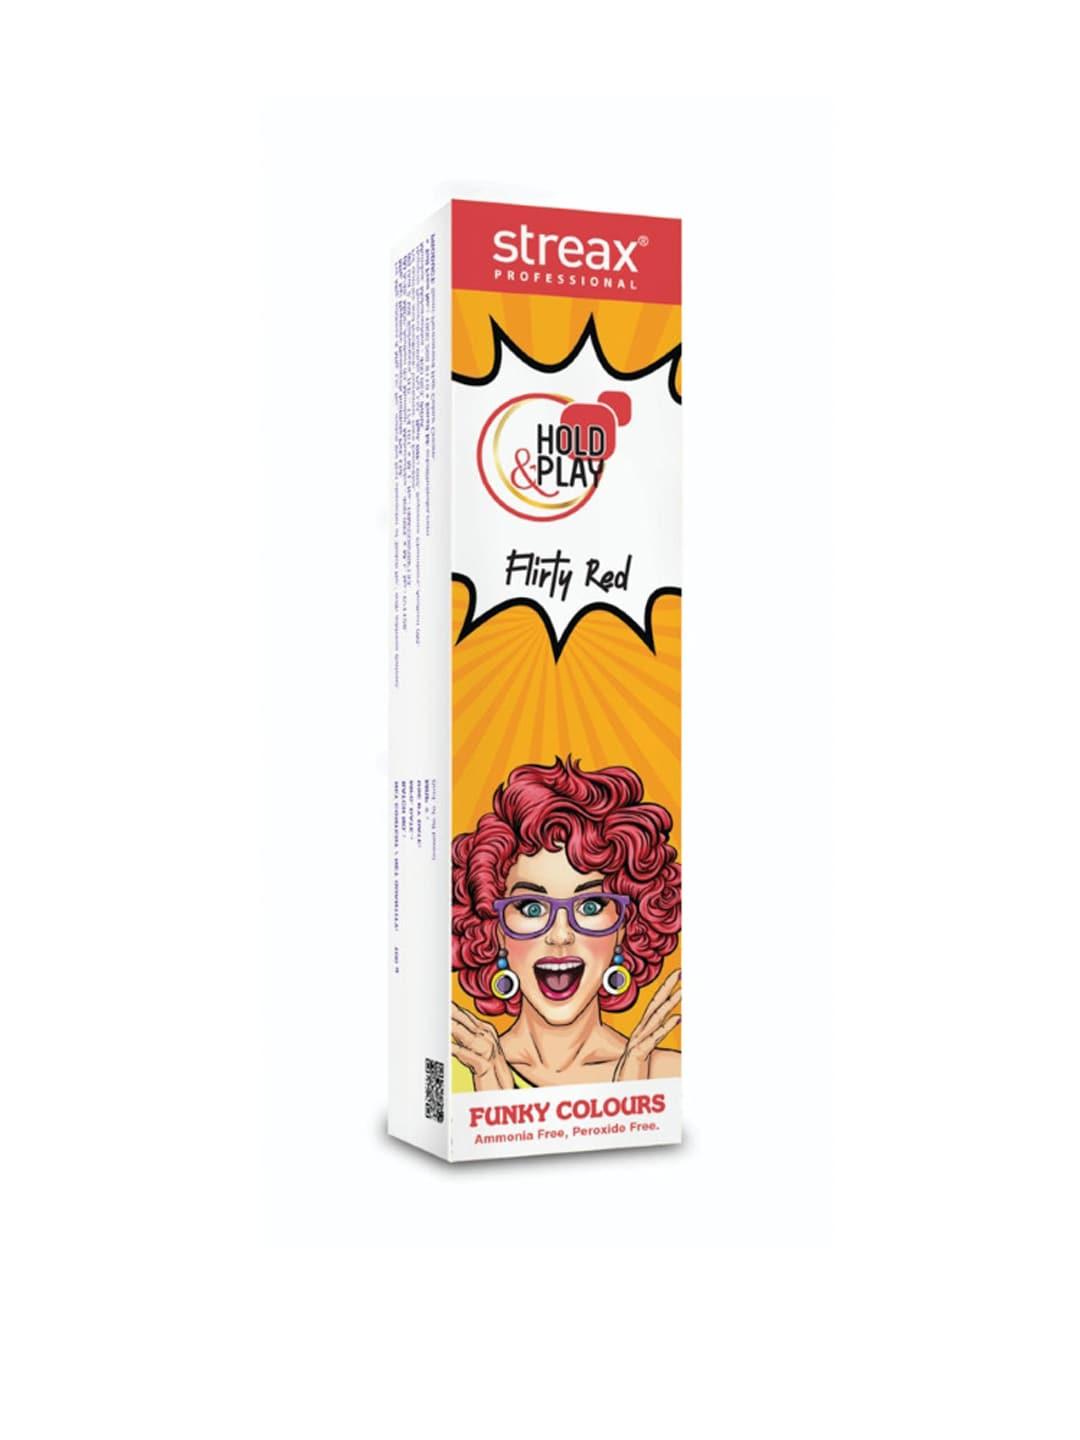 streax professional hold & play funky colours flirty red- 100 g